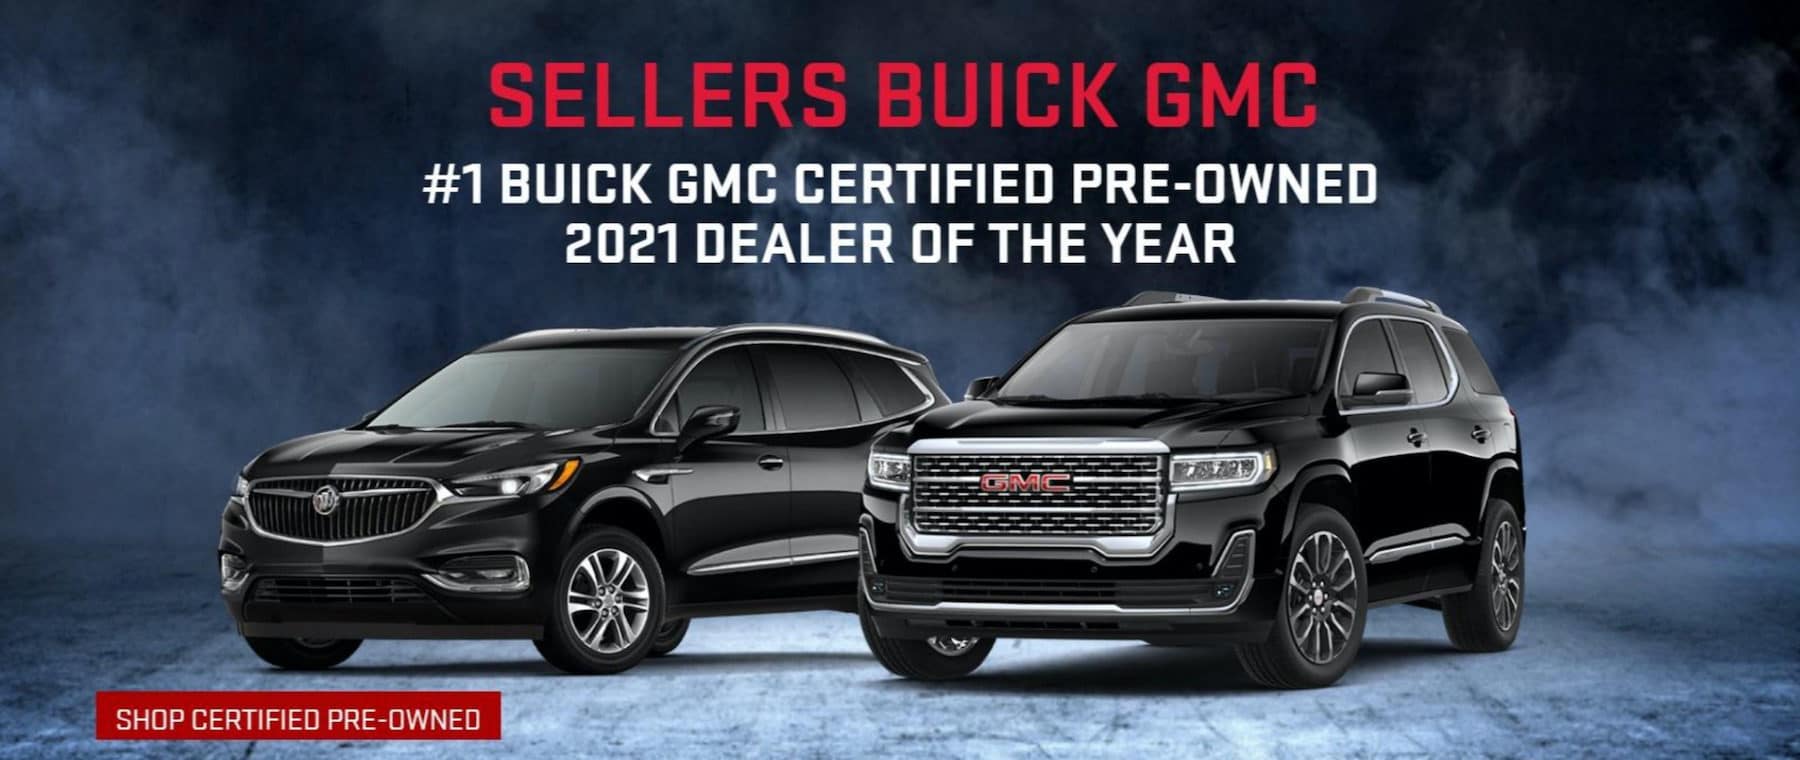 Sellers Buick GMC